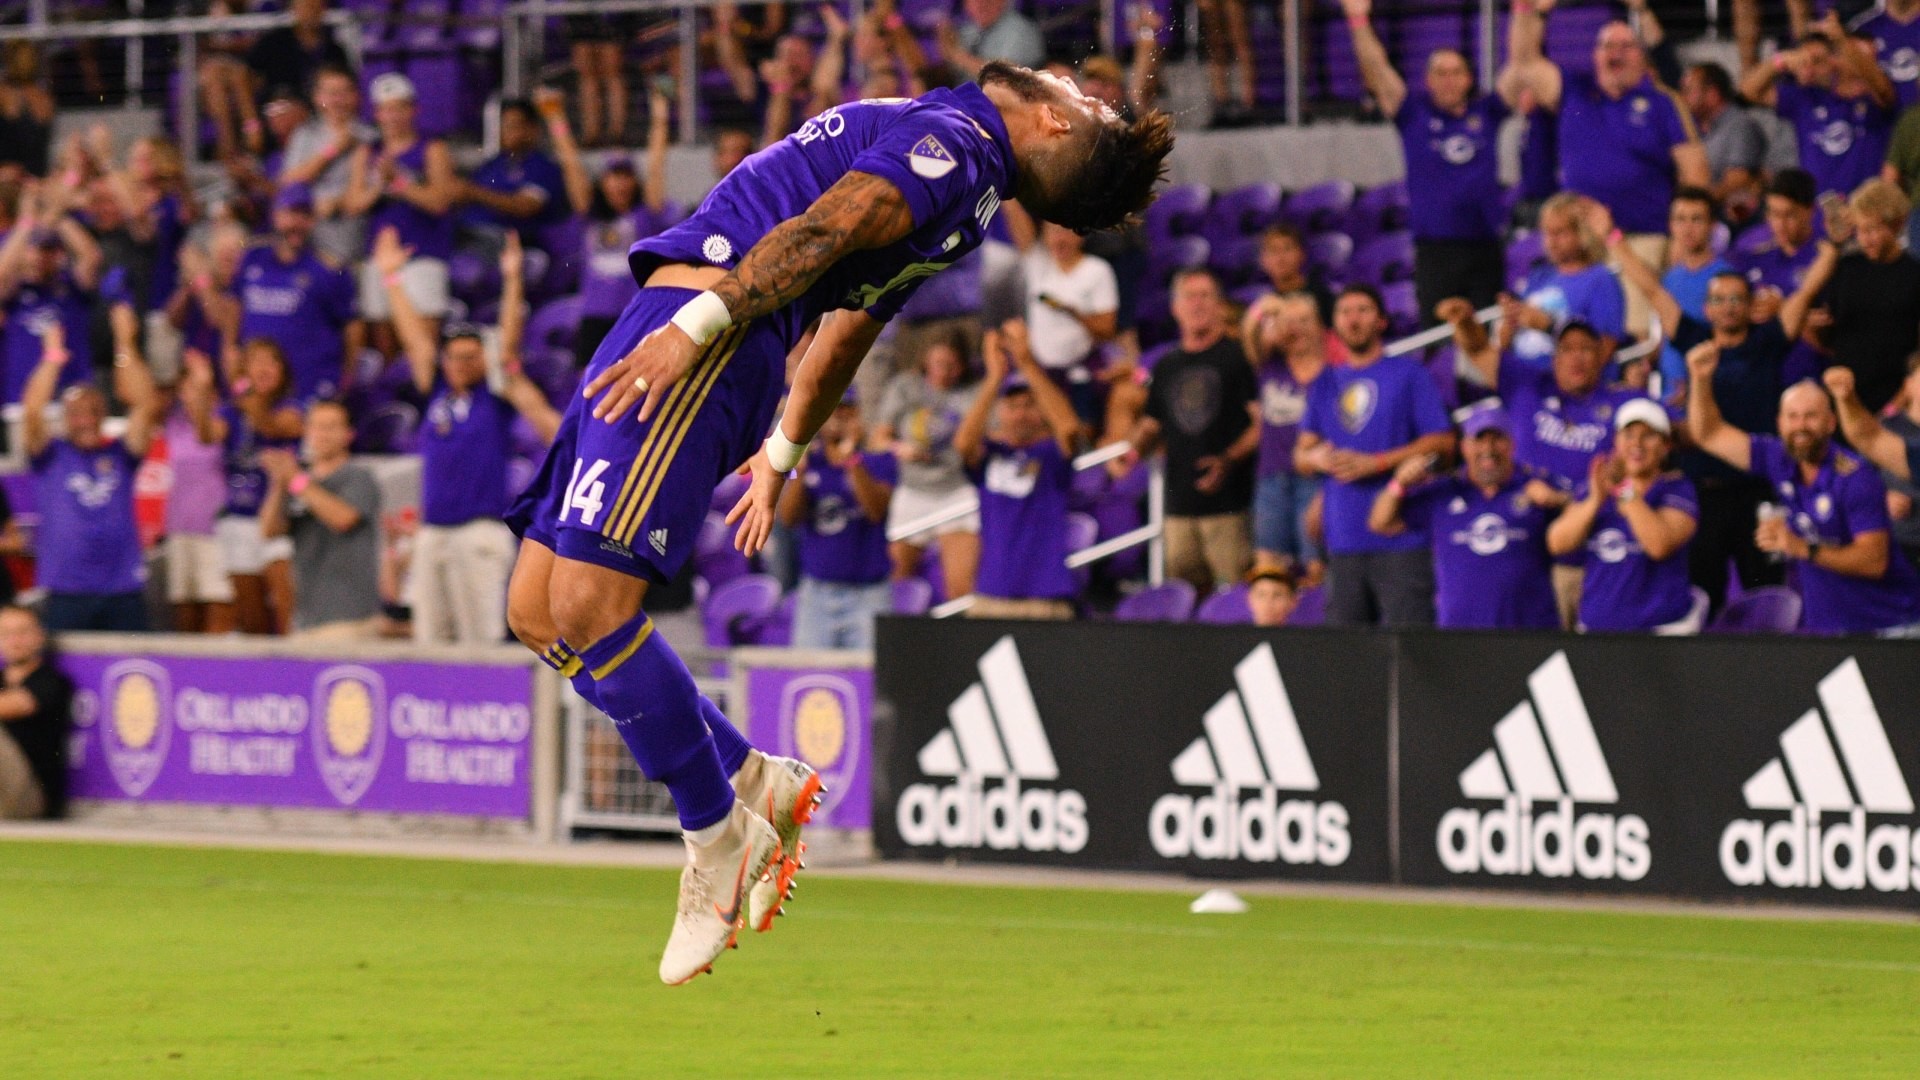 1920x1080 Orlando City SC Ends Losing Skid with Win Over Toronto FC – Gallery